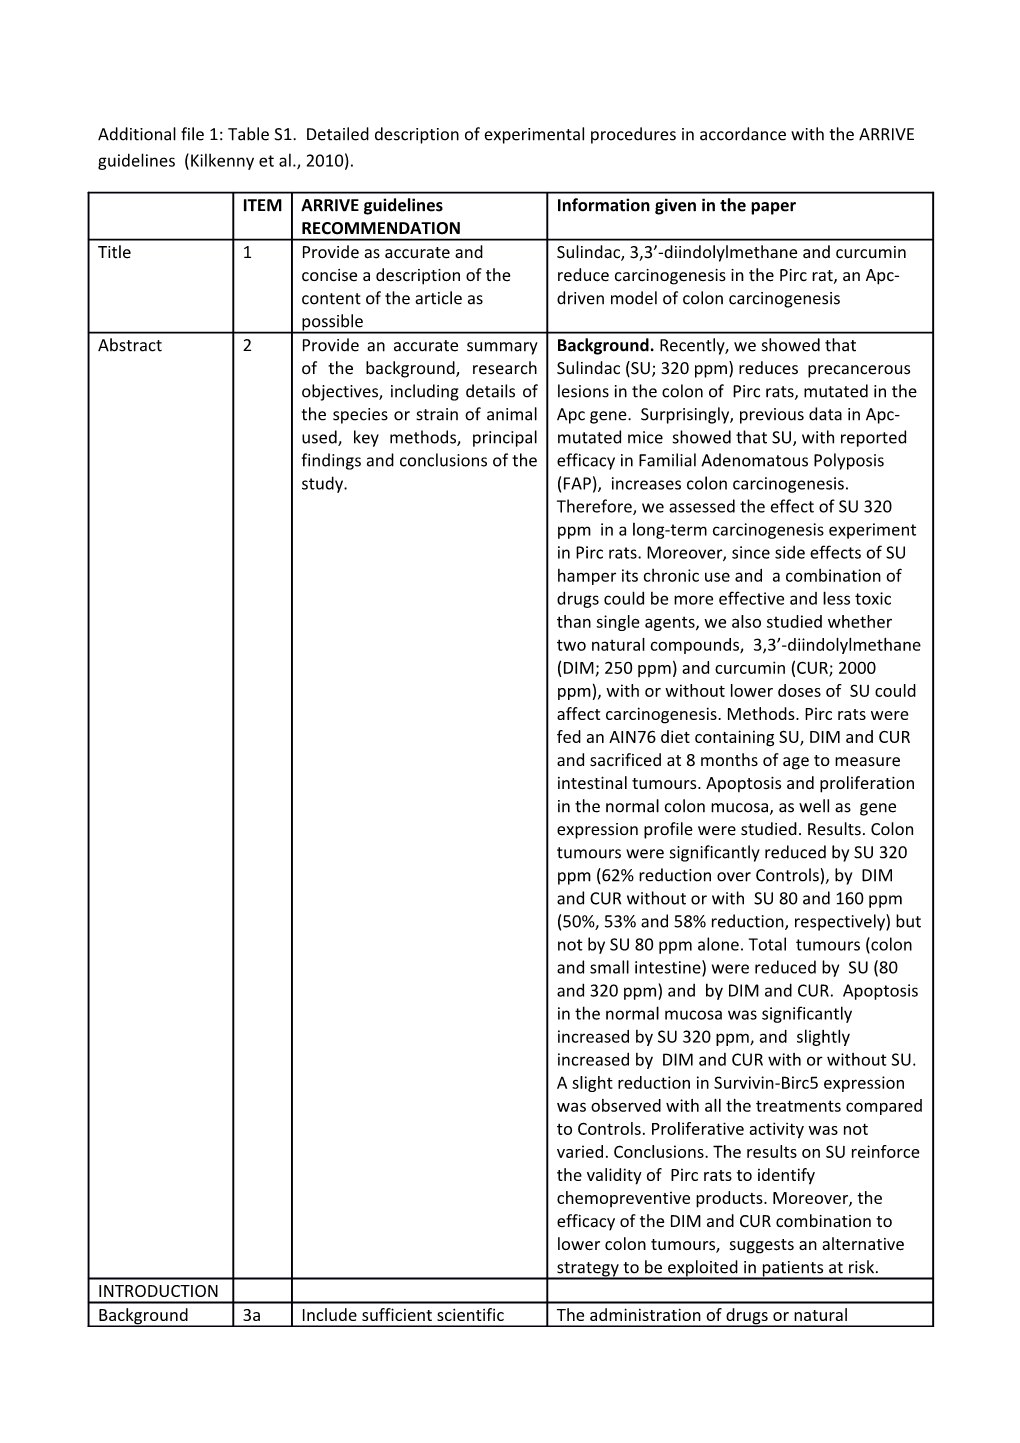 Additional File 1: Table S1. Detailed Description of Experimental Procedures in Accordance